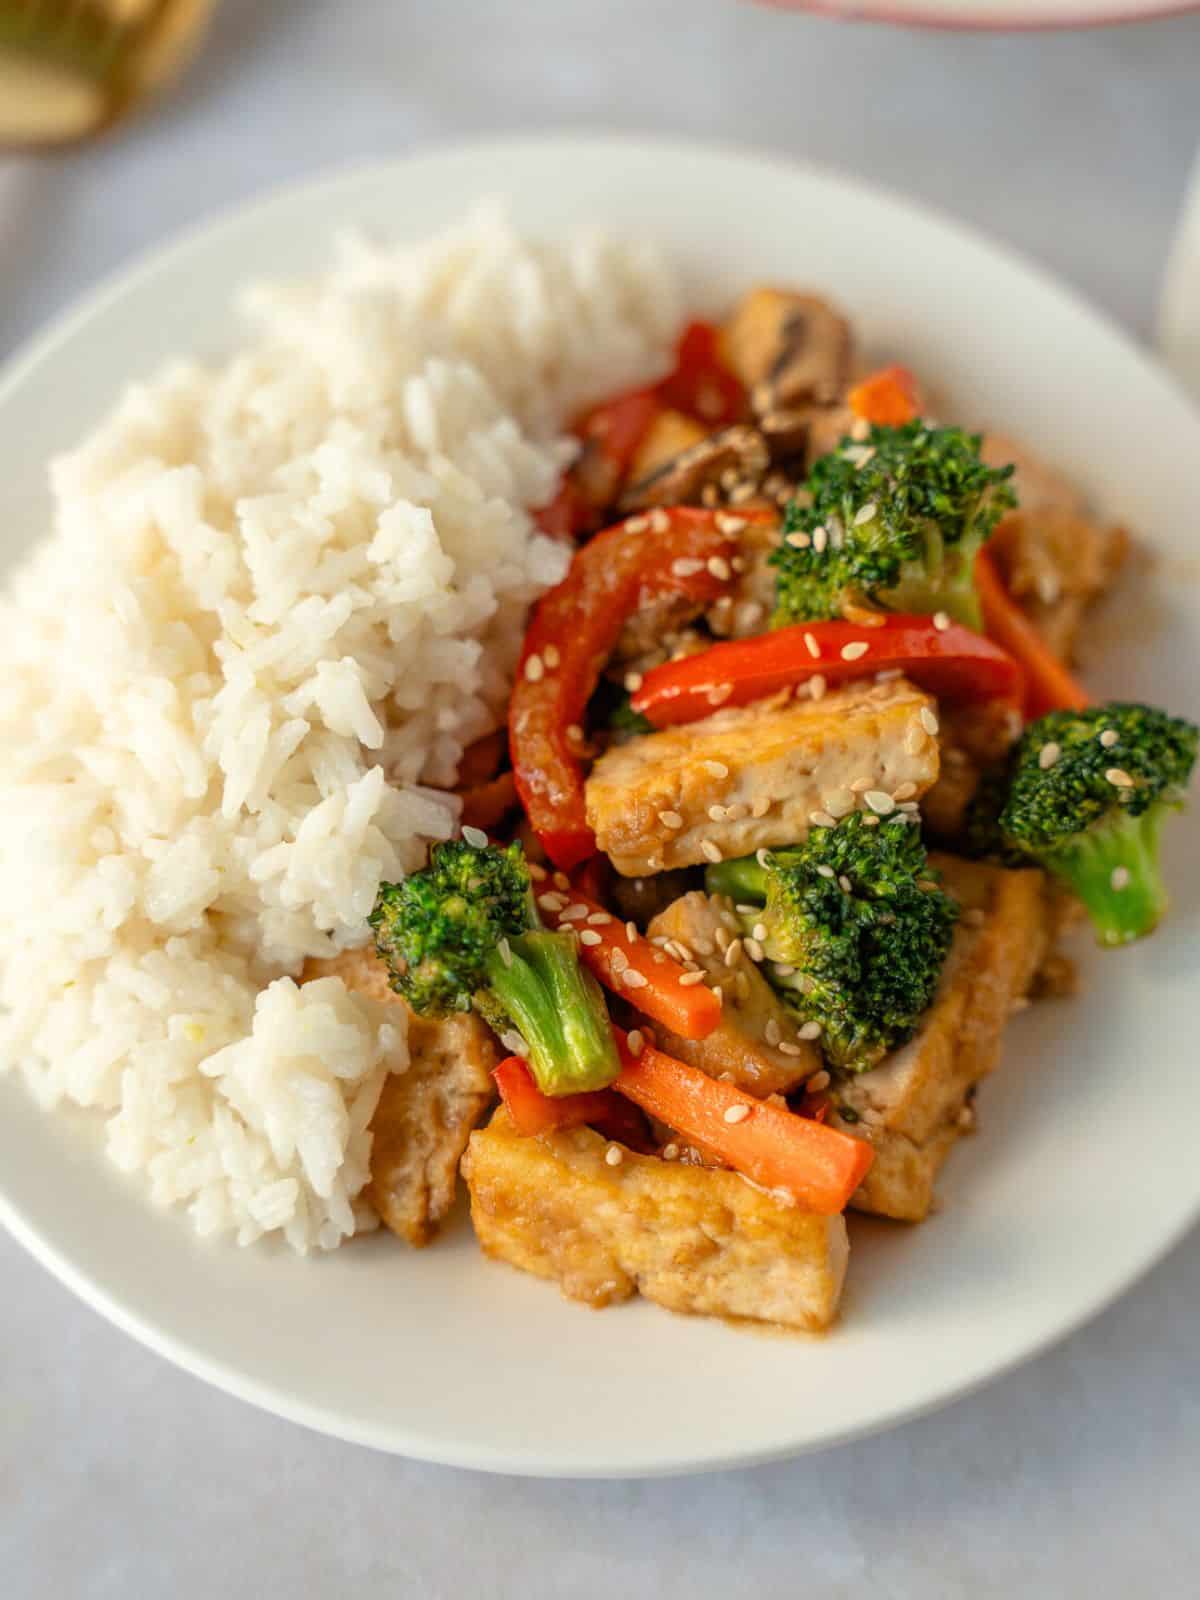 Tofu with vegetables on a plate with a side of rice.